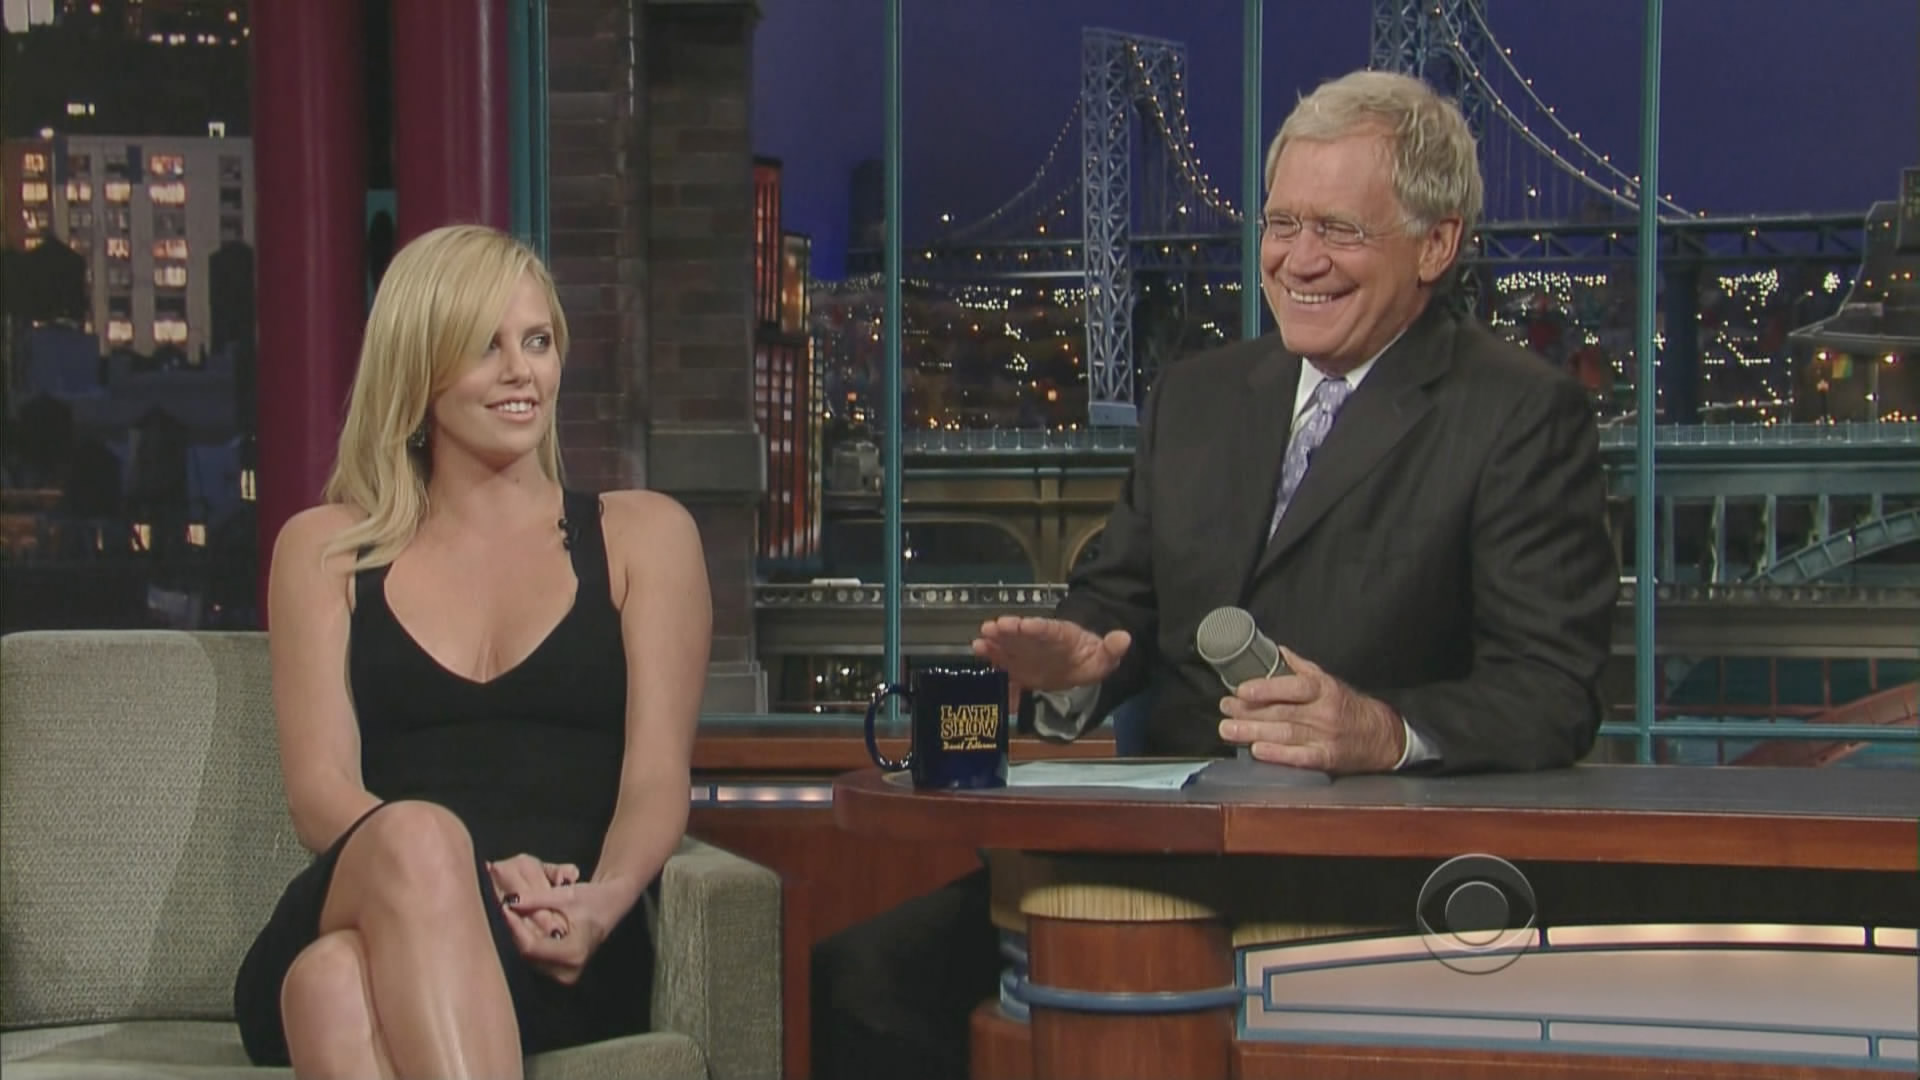 Late Show with David Letterman nude pics.